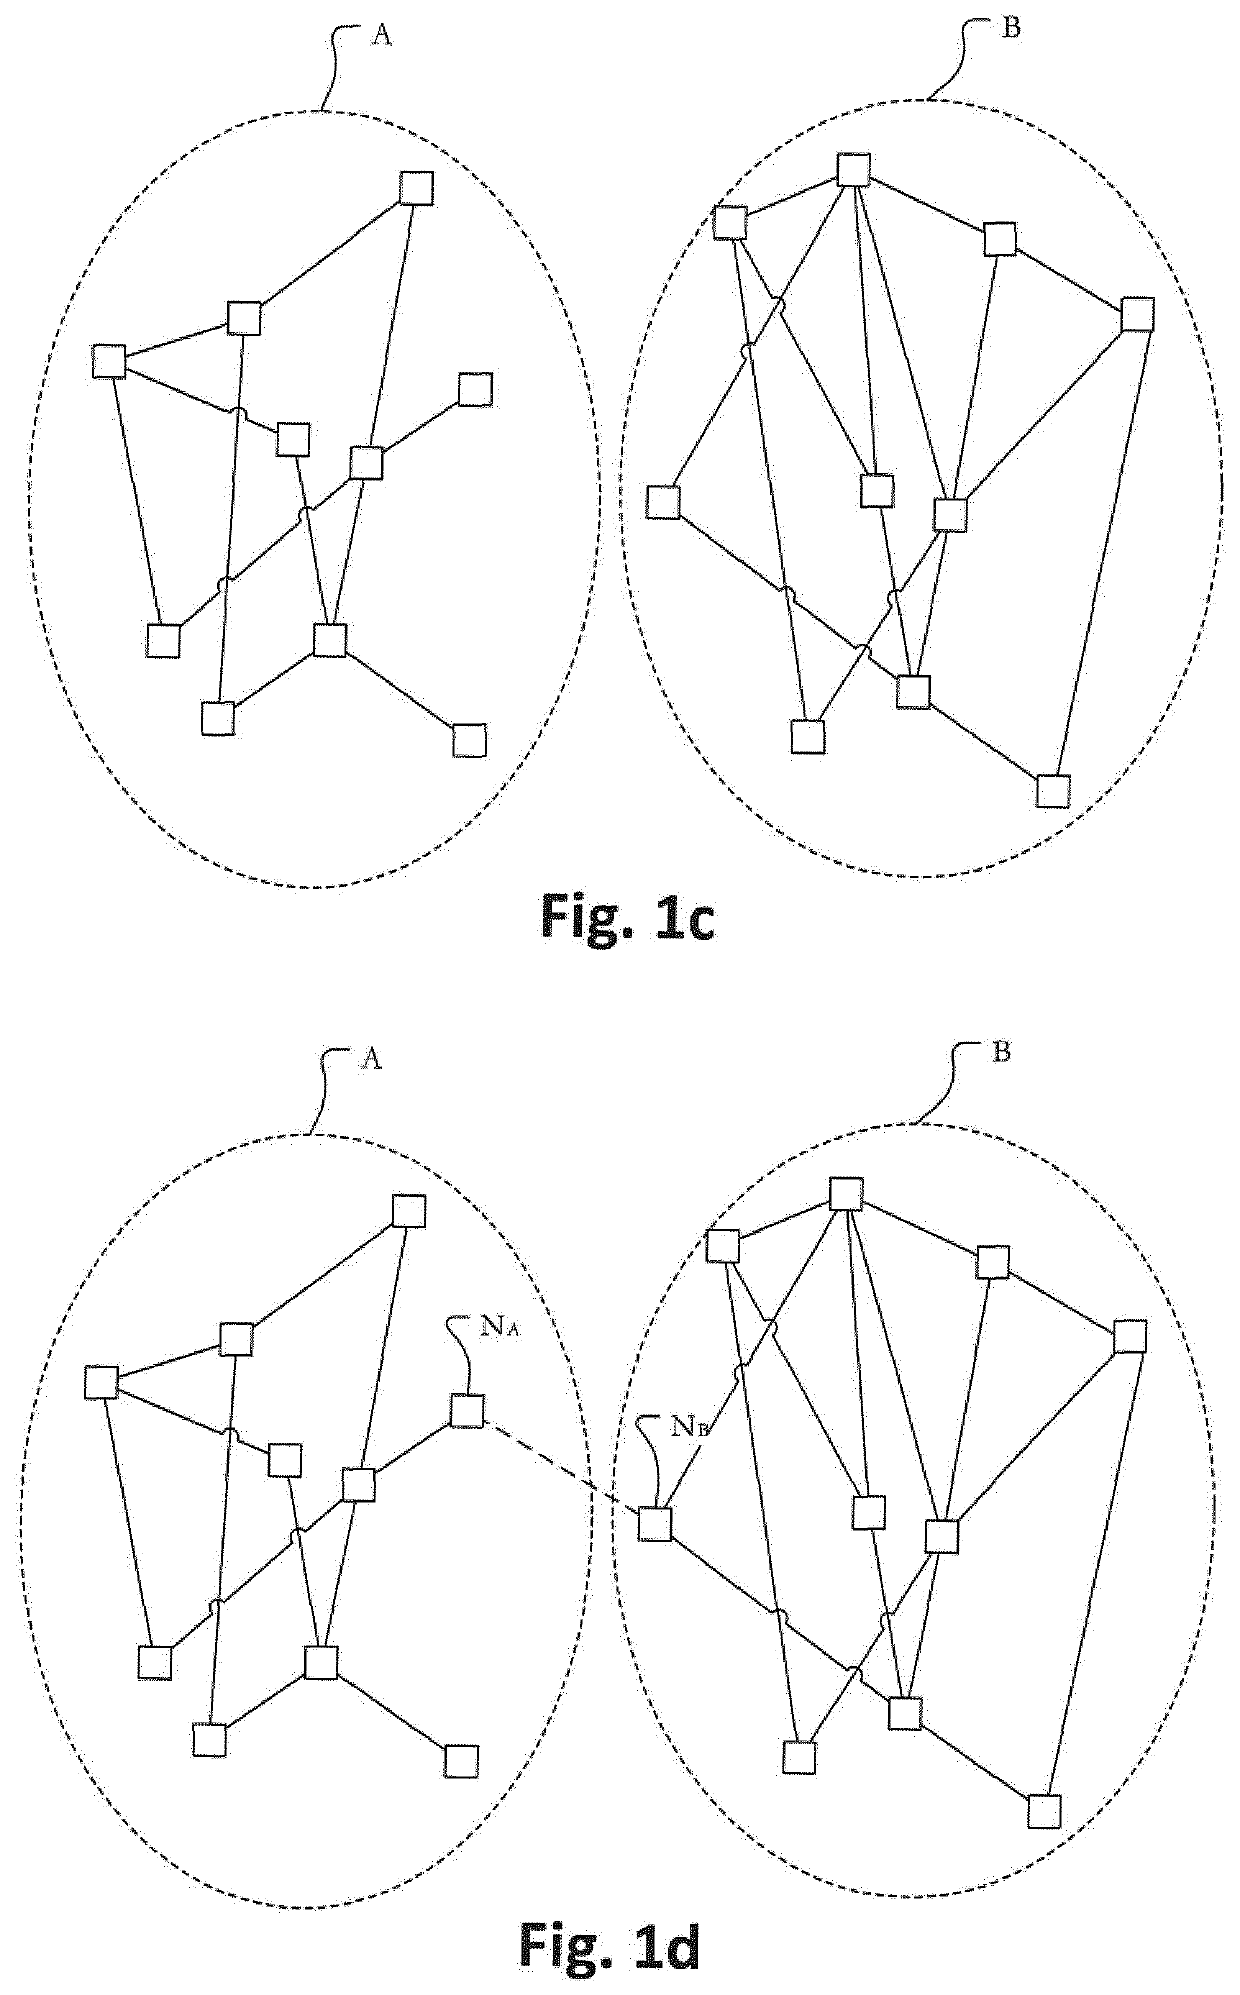 Electronic devices, systems and methods